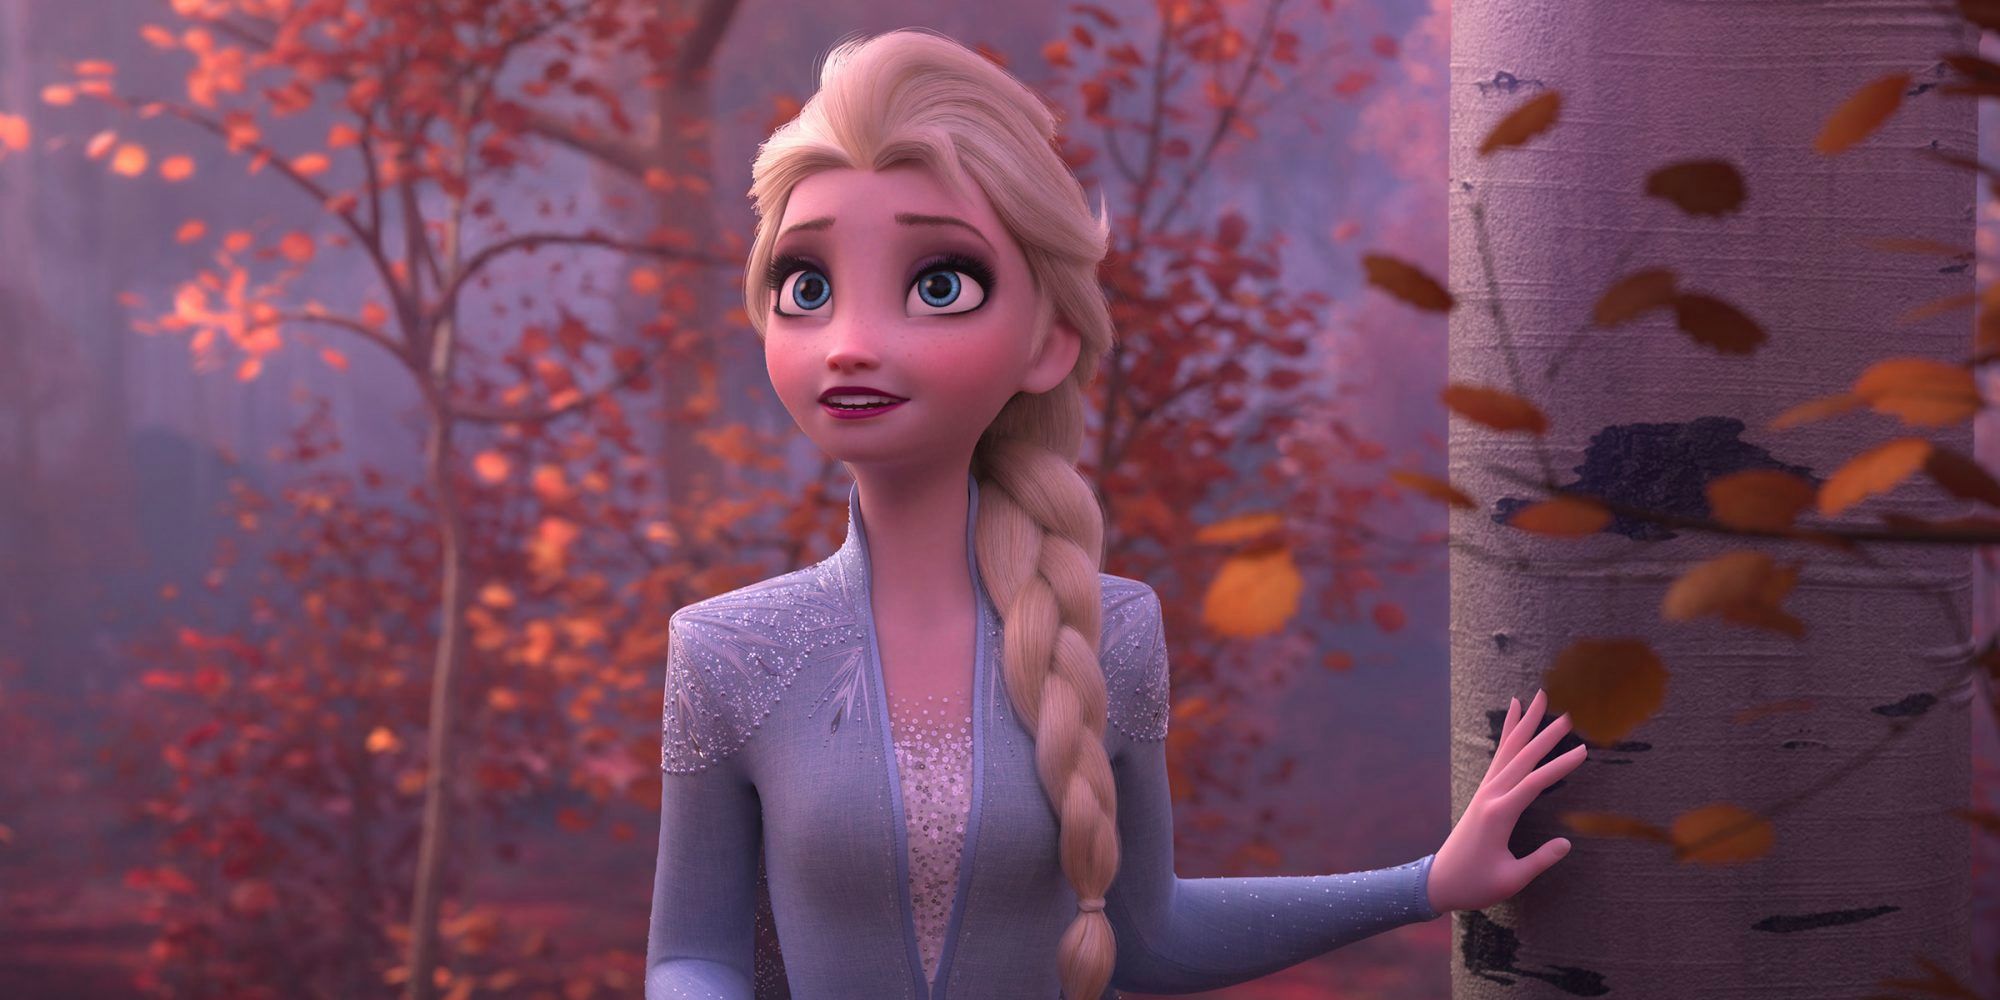 Frozen 2 Gets Disney Release THIS Sunday (3 Months Early) Thanks To Coronavirus